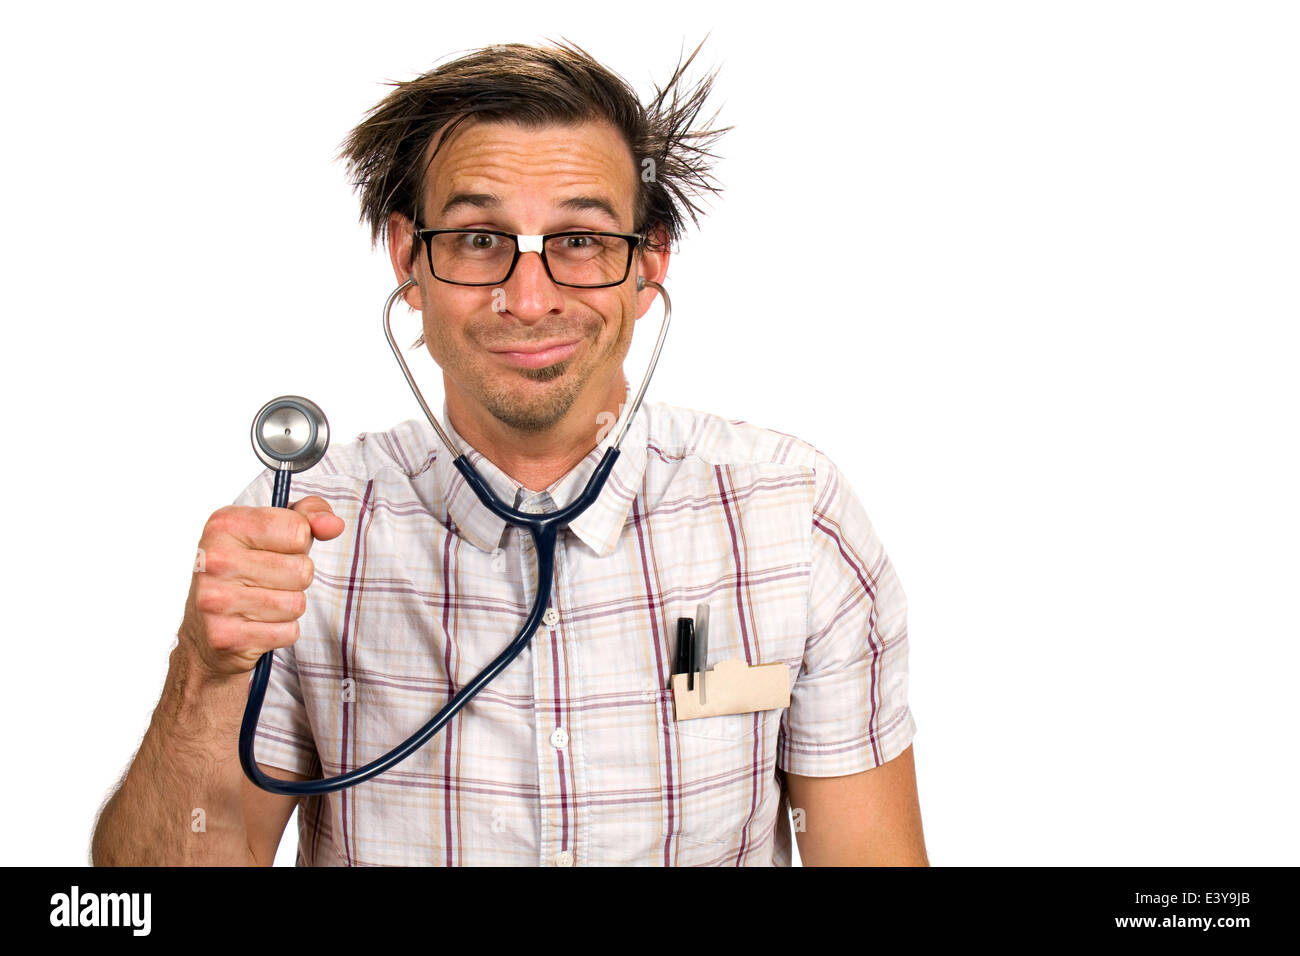 Nerdy doctor with a silly facial expression holds up a stethoscope. Stock Photo